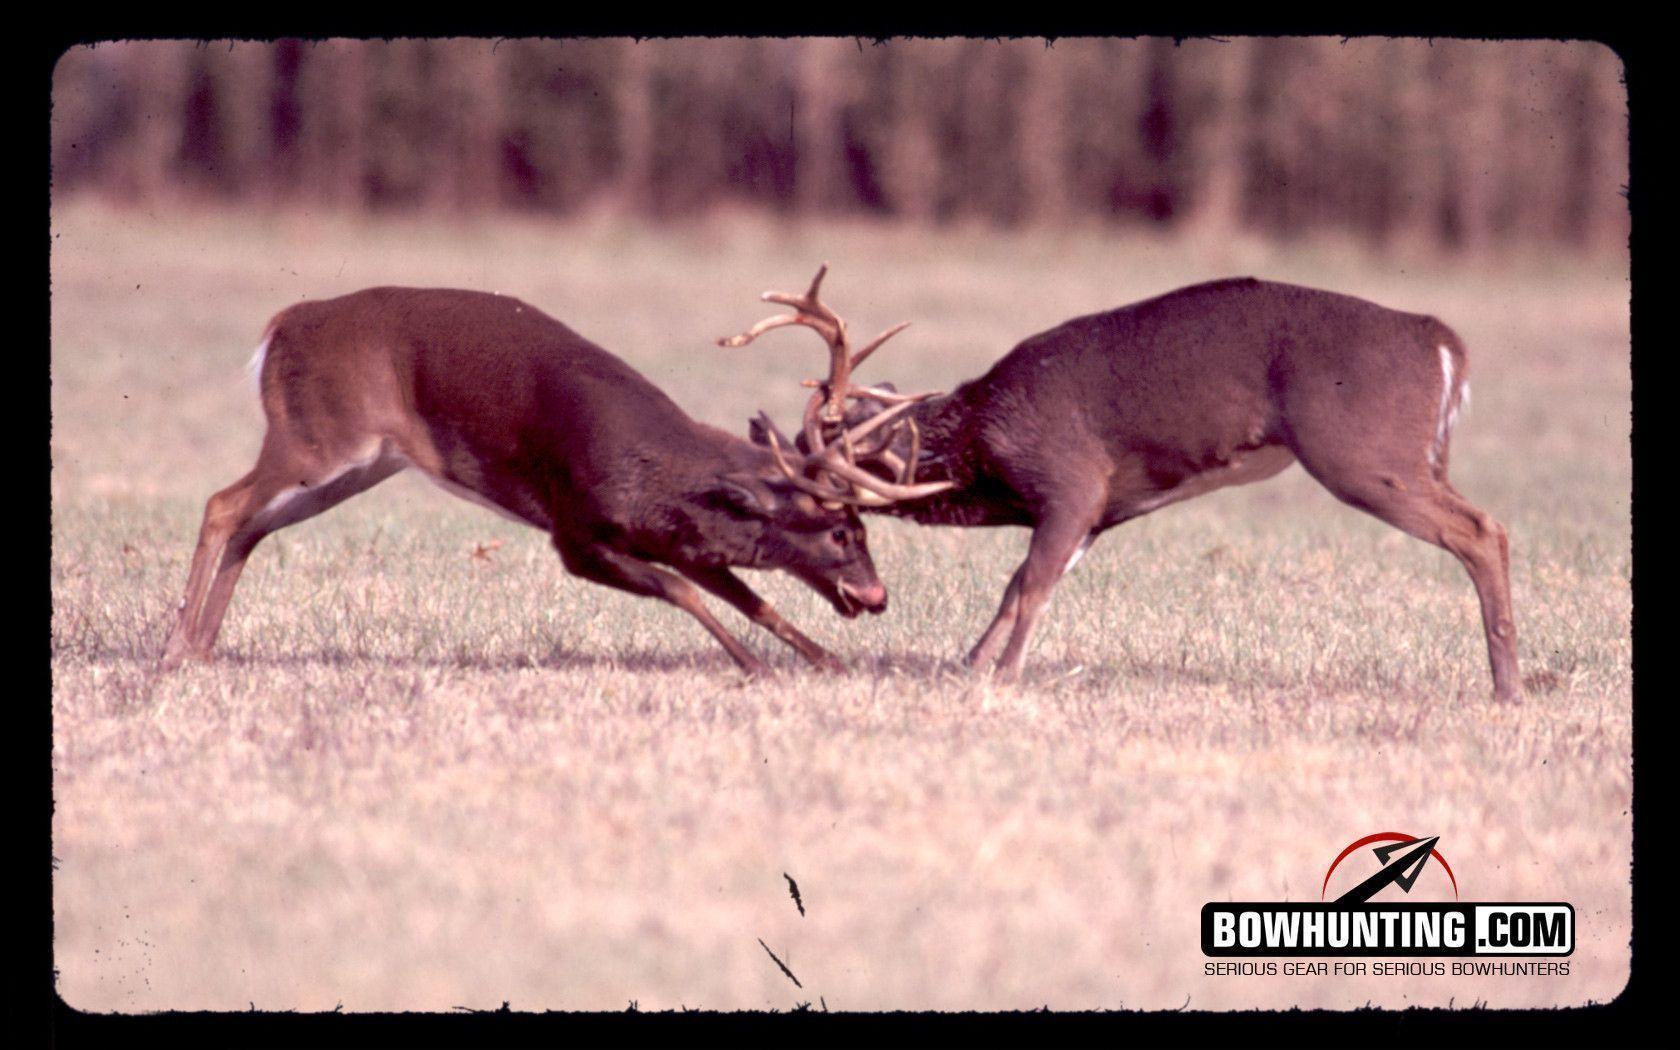 Mobile Deer Hunting Bowhunting And Wallpaper, HQ Background. HD